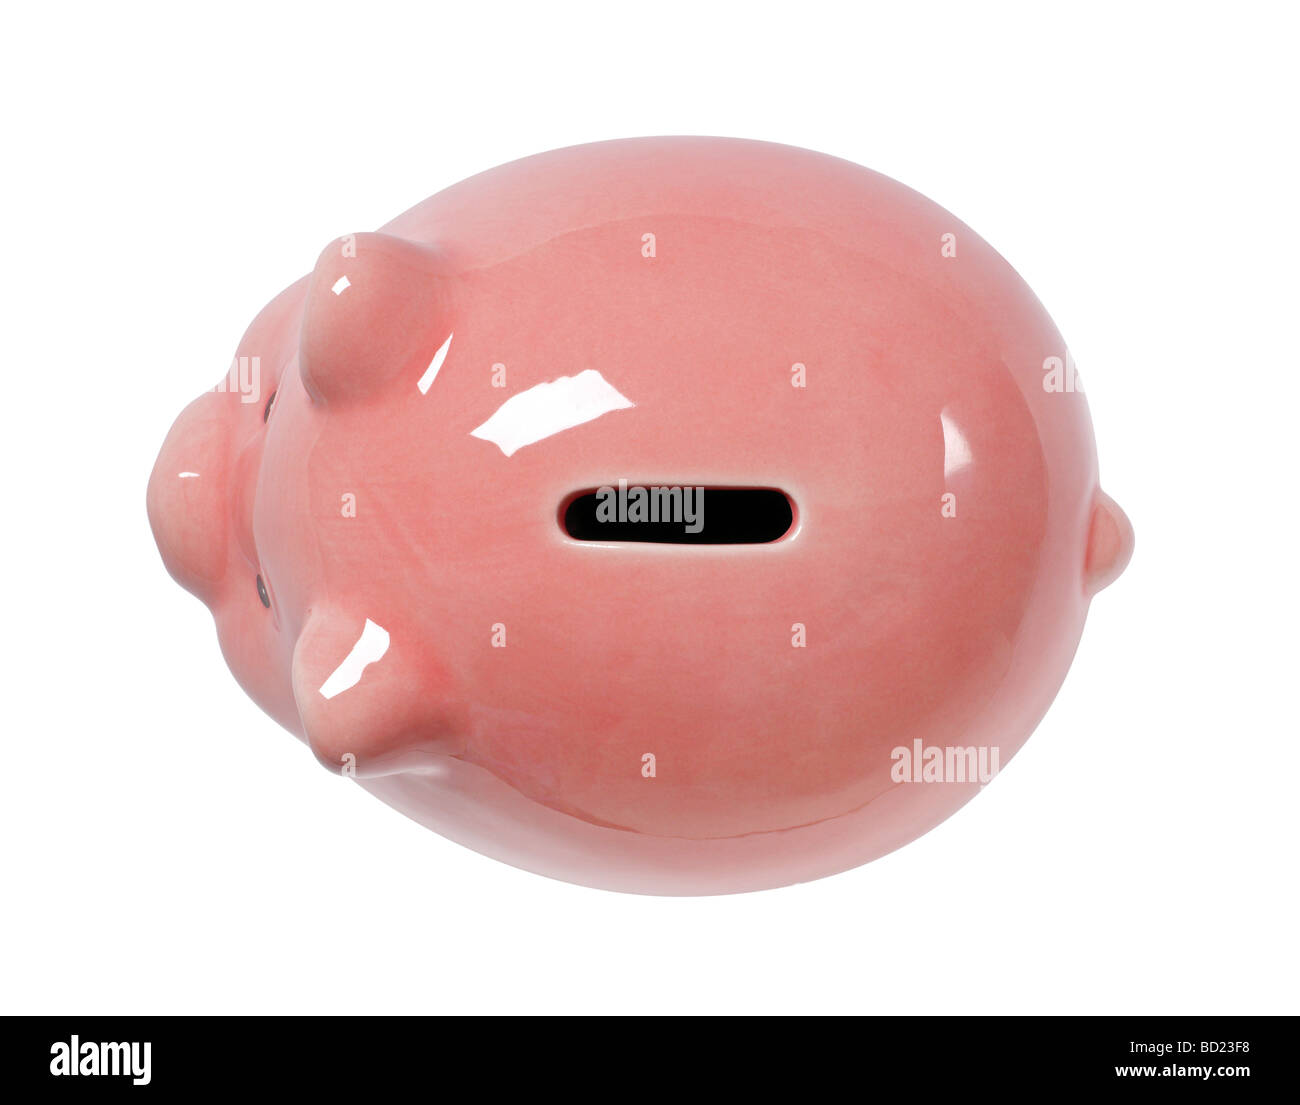 Piggy Bank elevated view Stock Photo